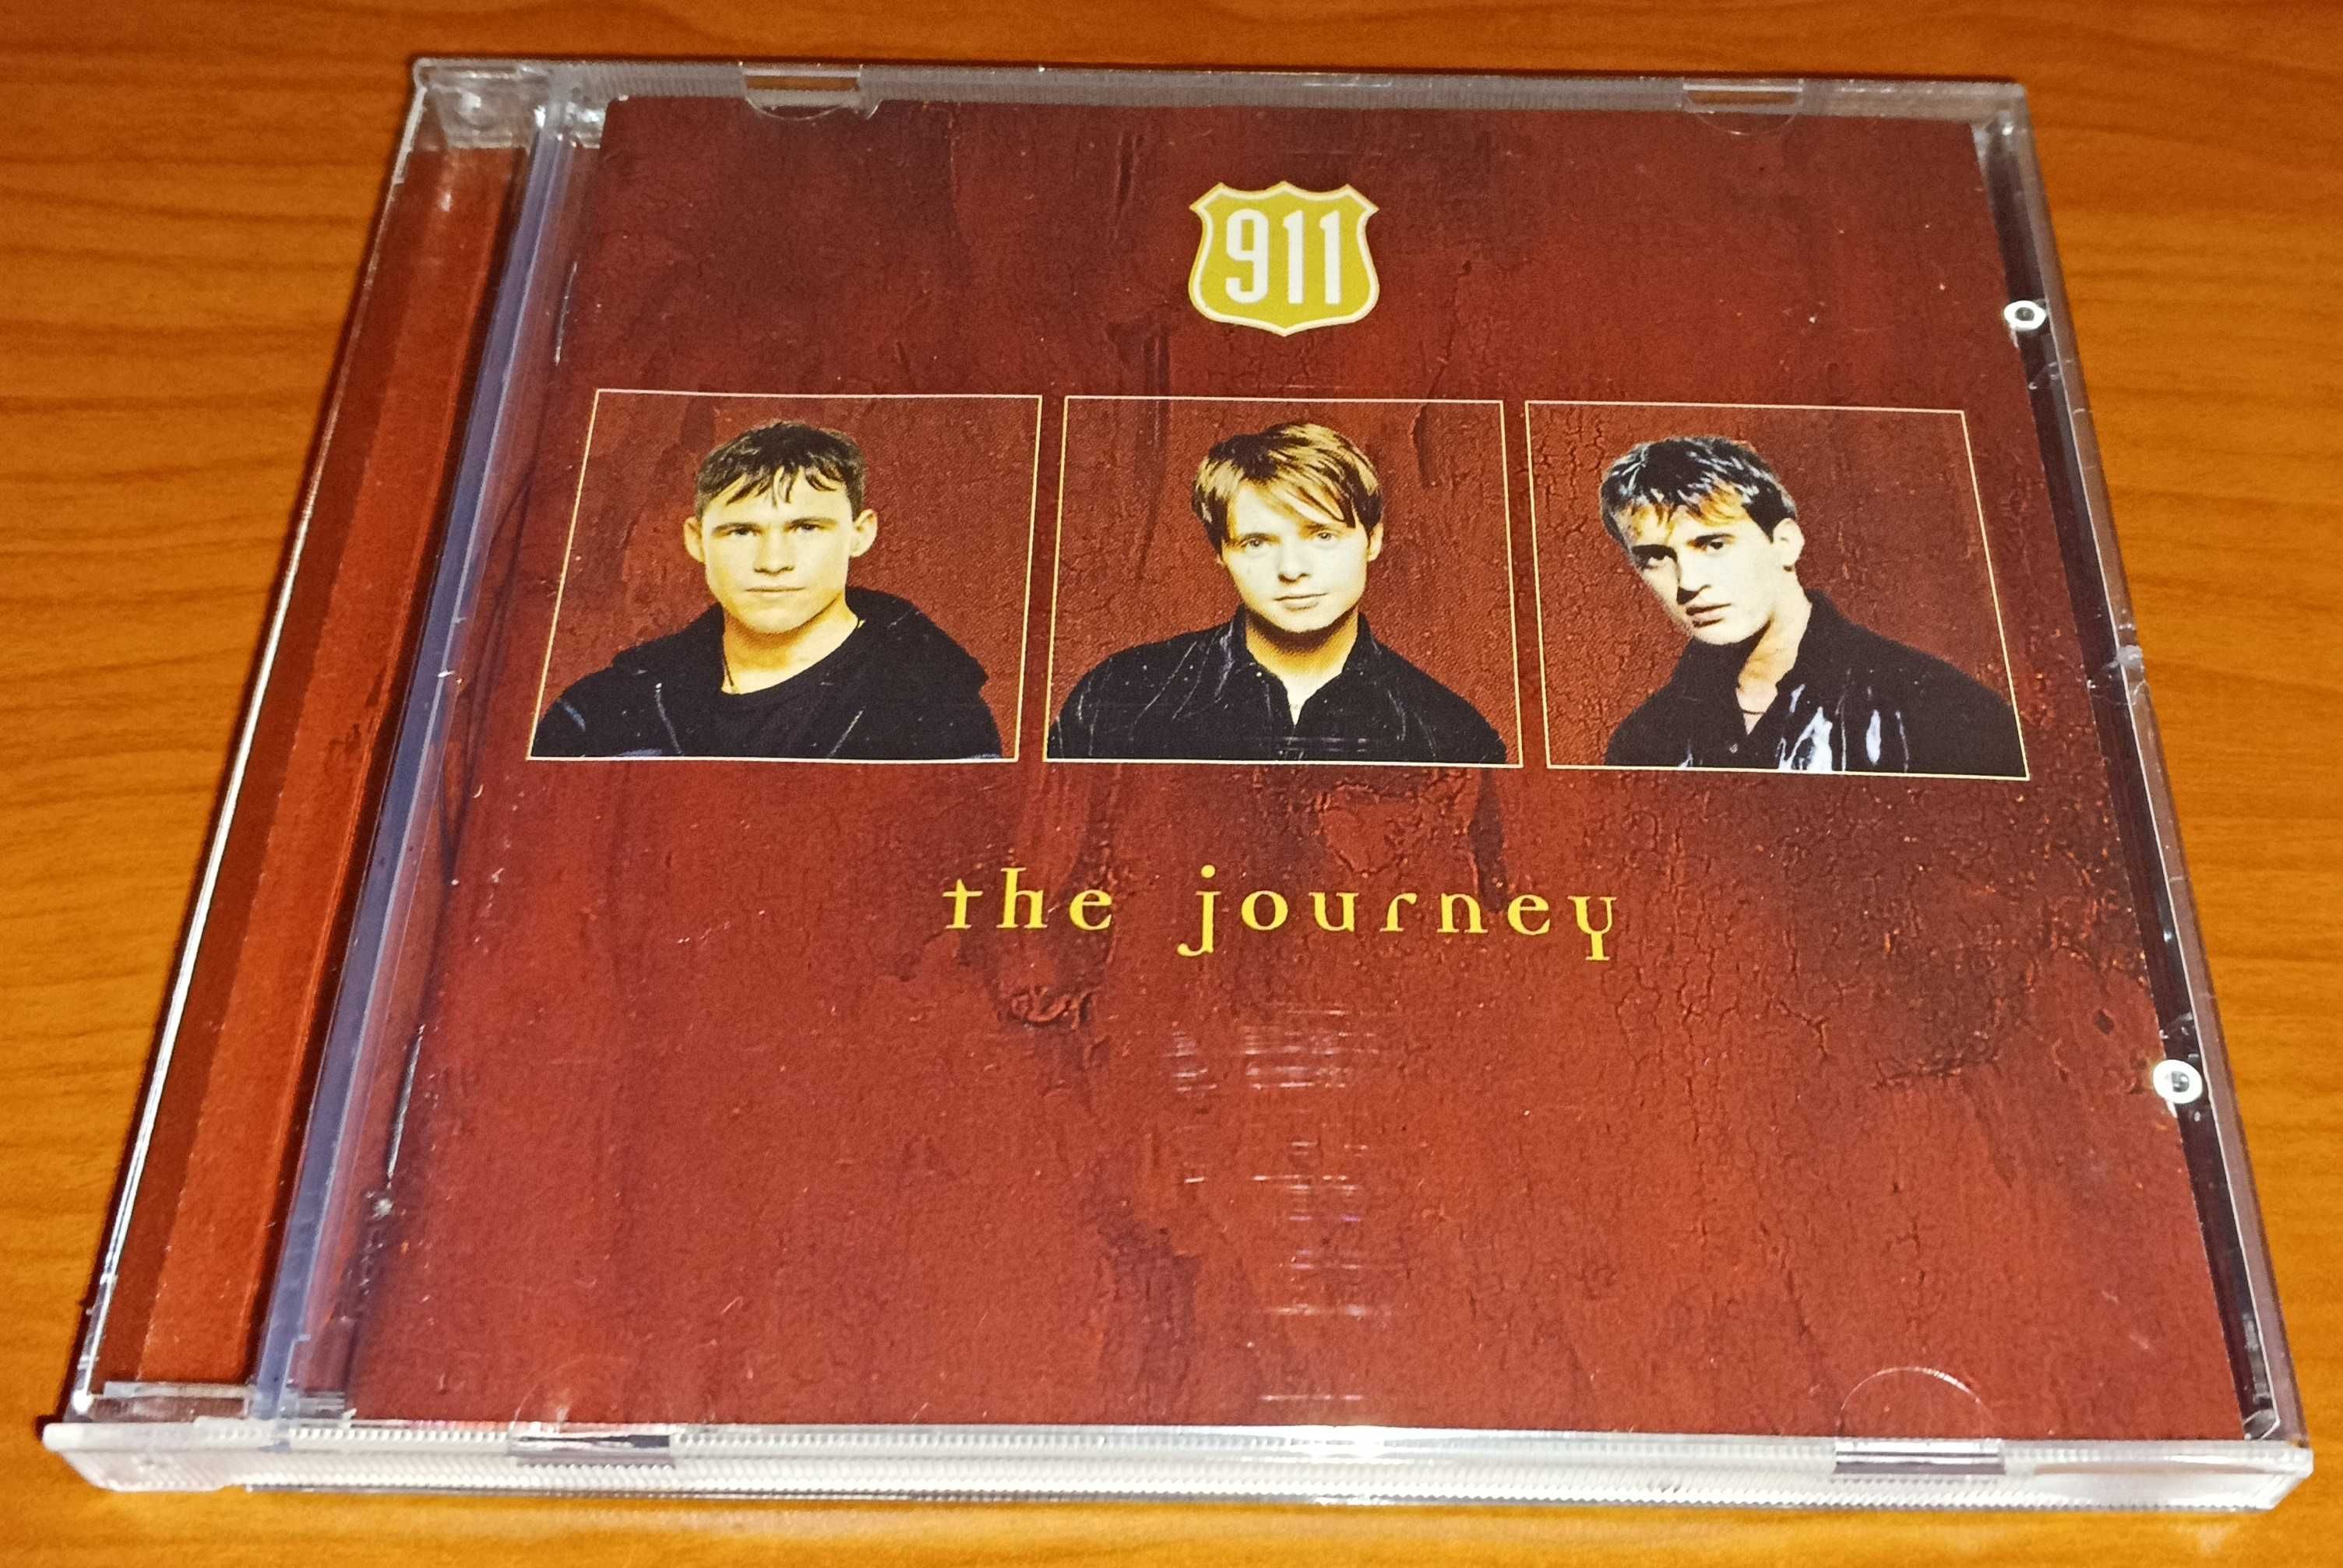 CD 911 - The Journey